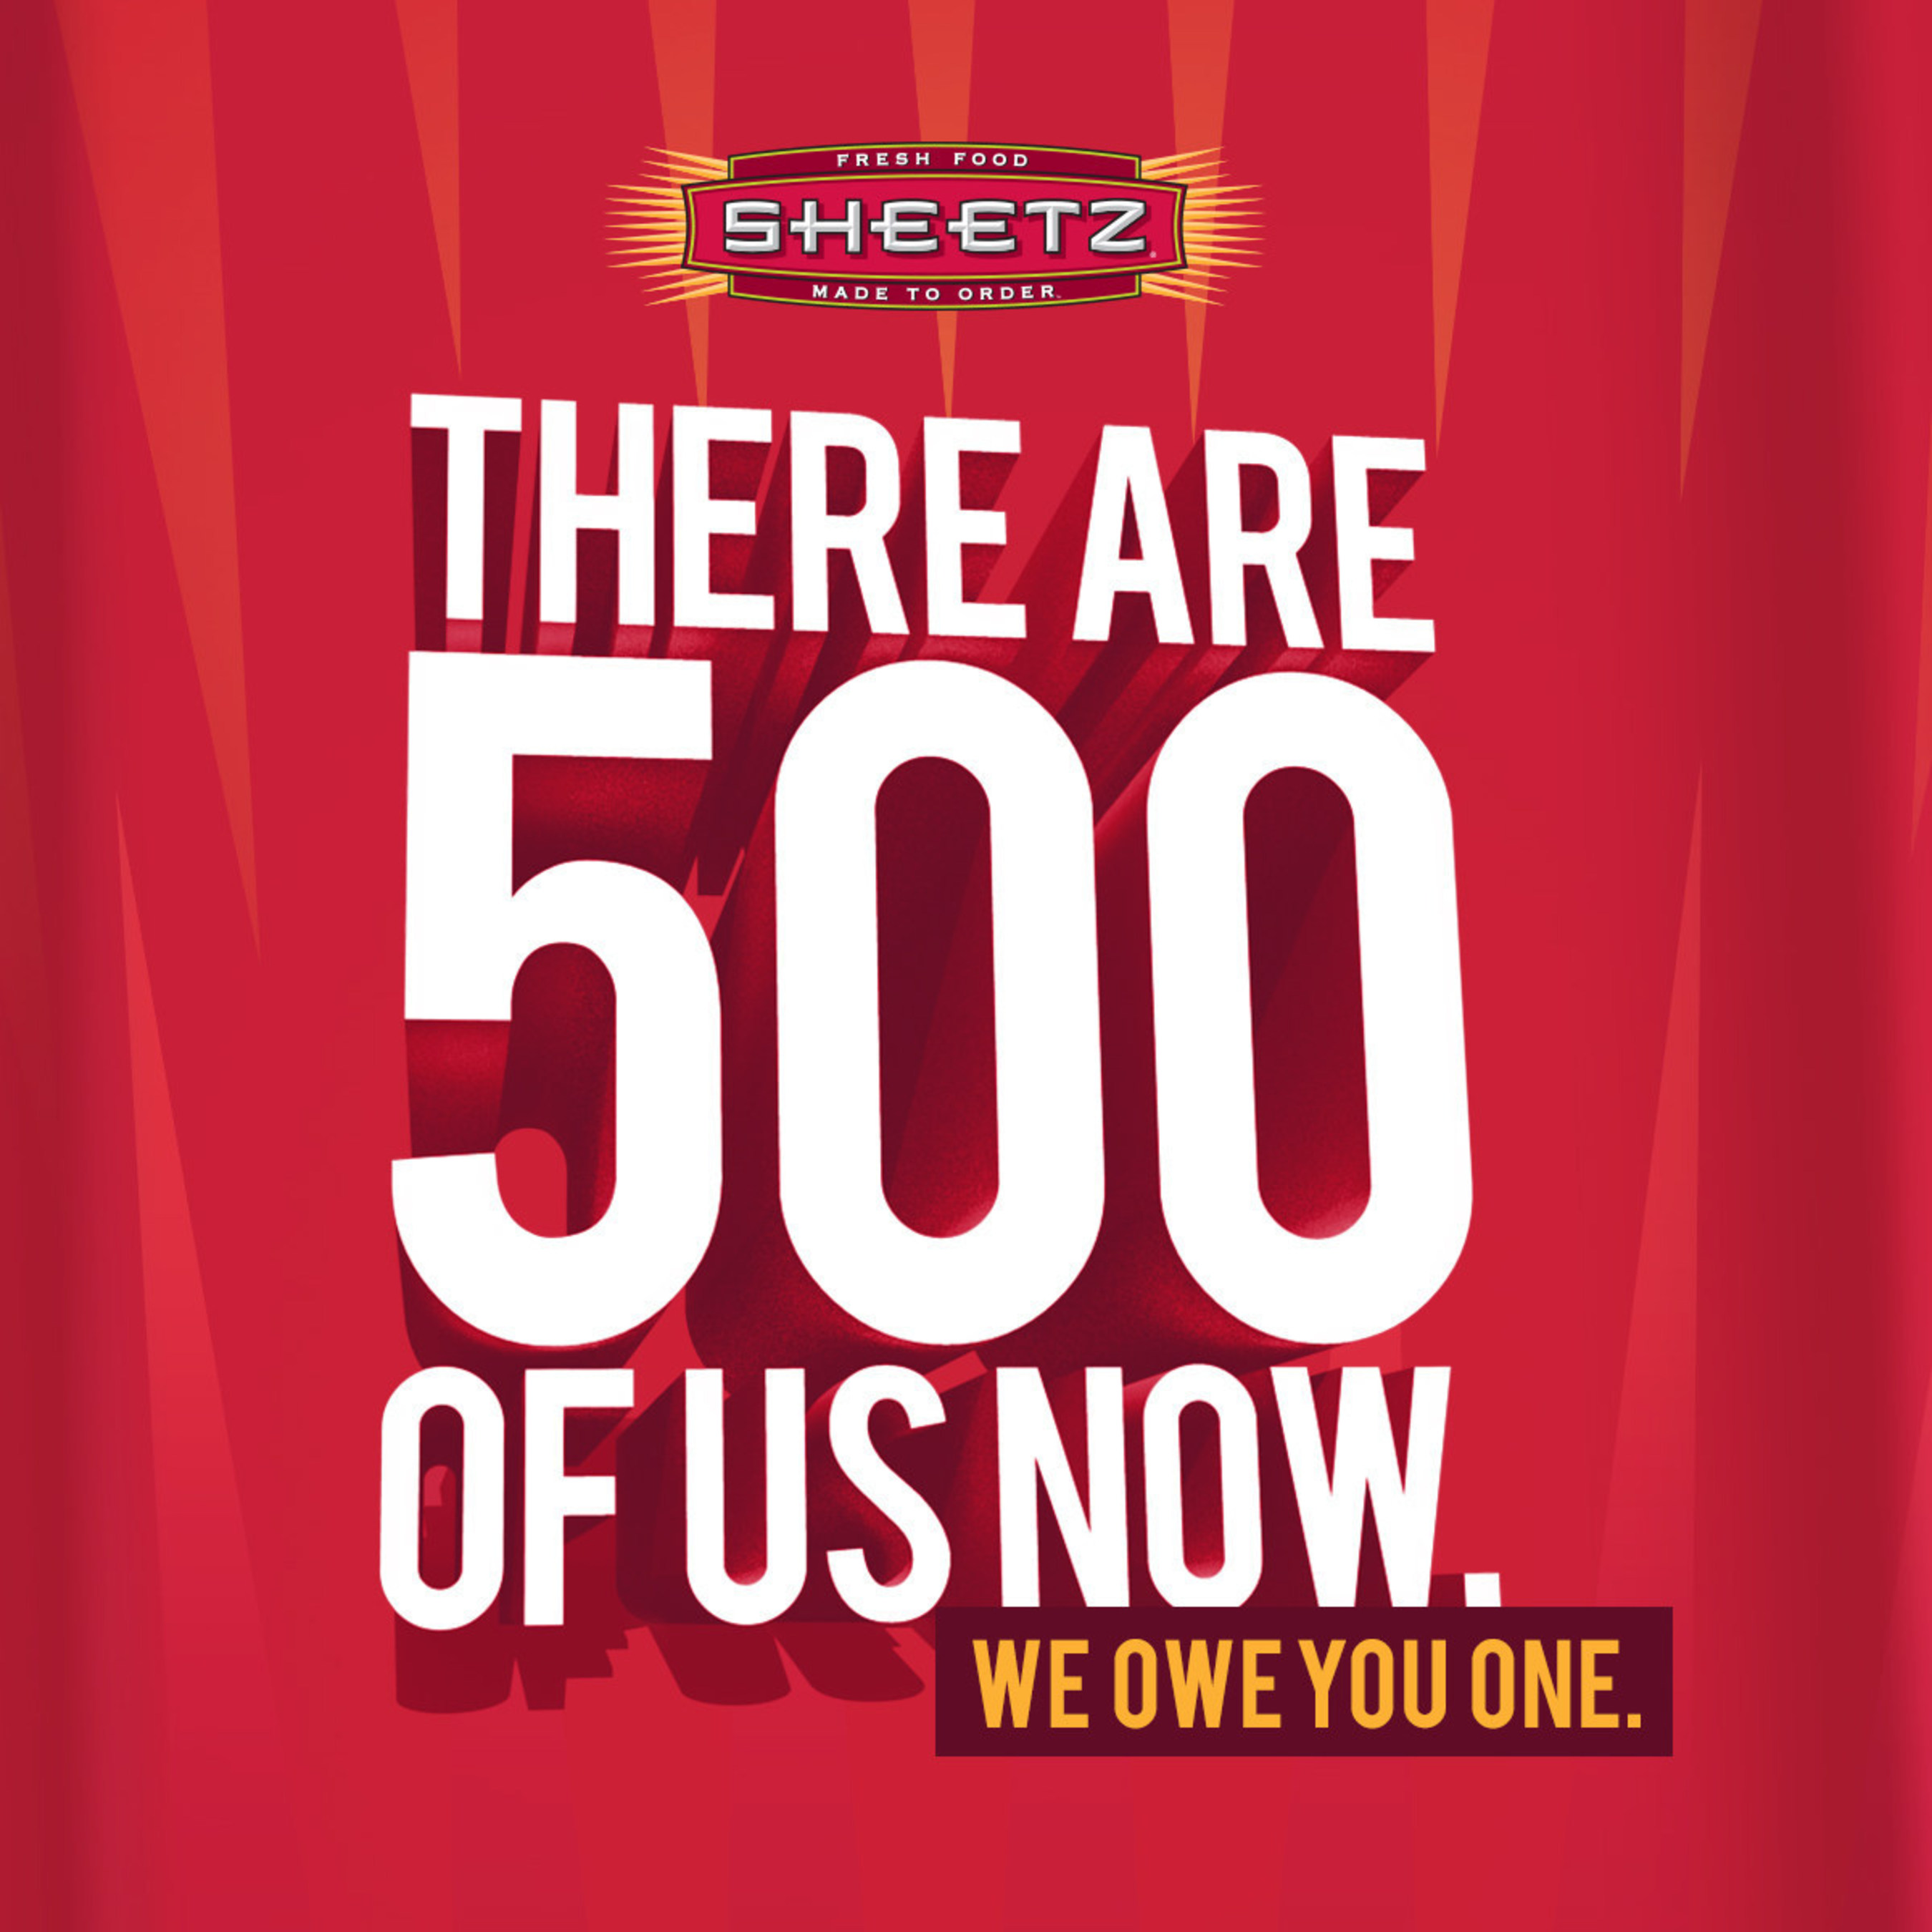 Sheetz celebrates its 500th store with free coffee and fountain drinks in all stores on Tuesday, February 24, 2015.